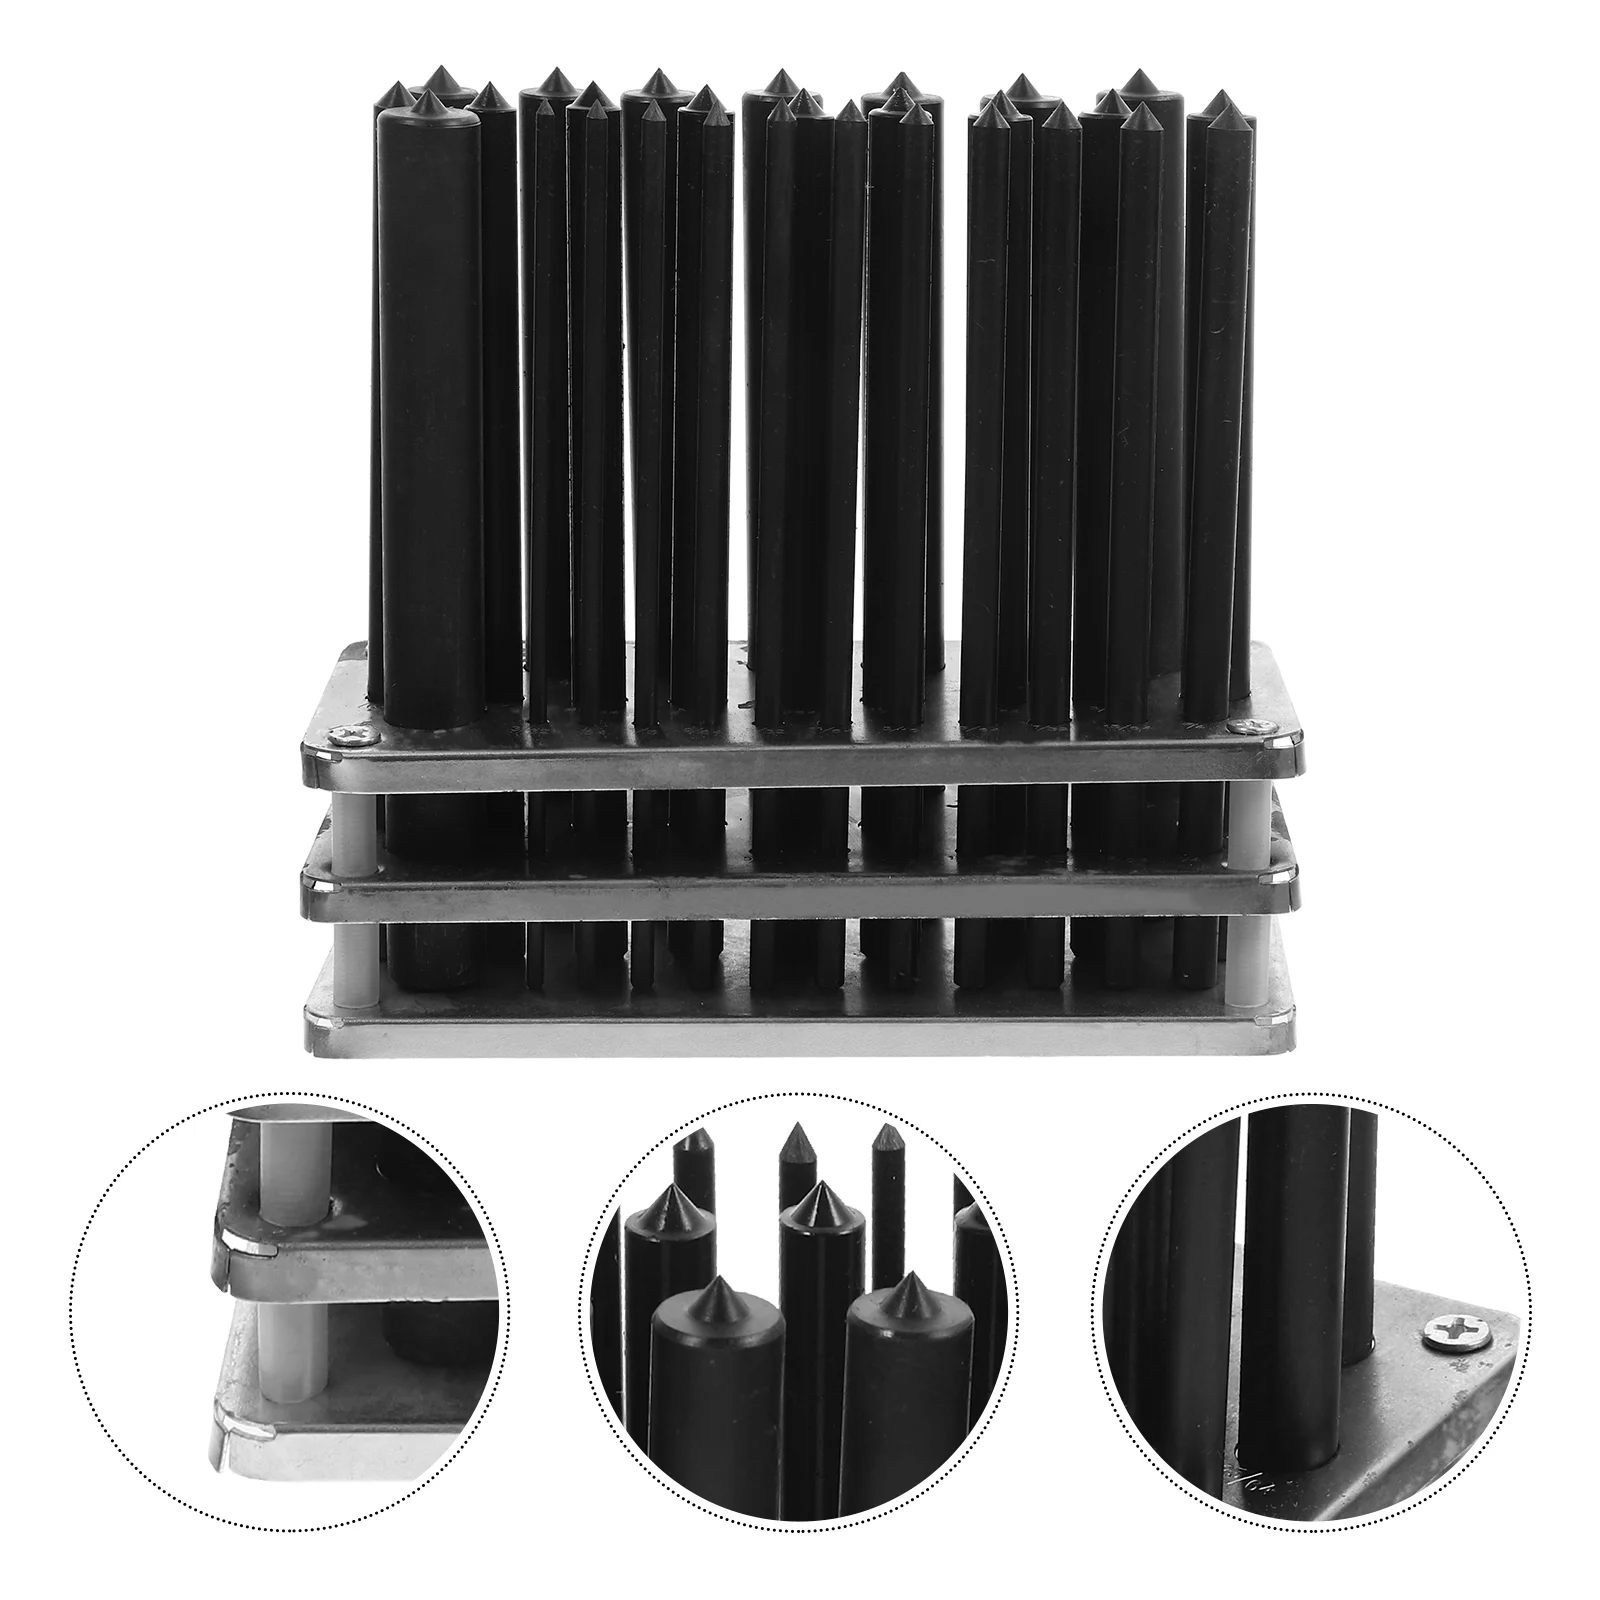 SEDY 9 Pieces Roll Pin Punch Set, Removing Repair Tool with Holder for Automotive, Watch Repair,Jewelry and Craft